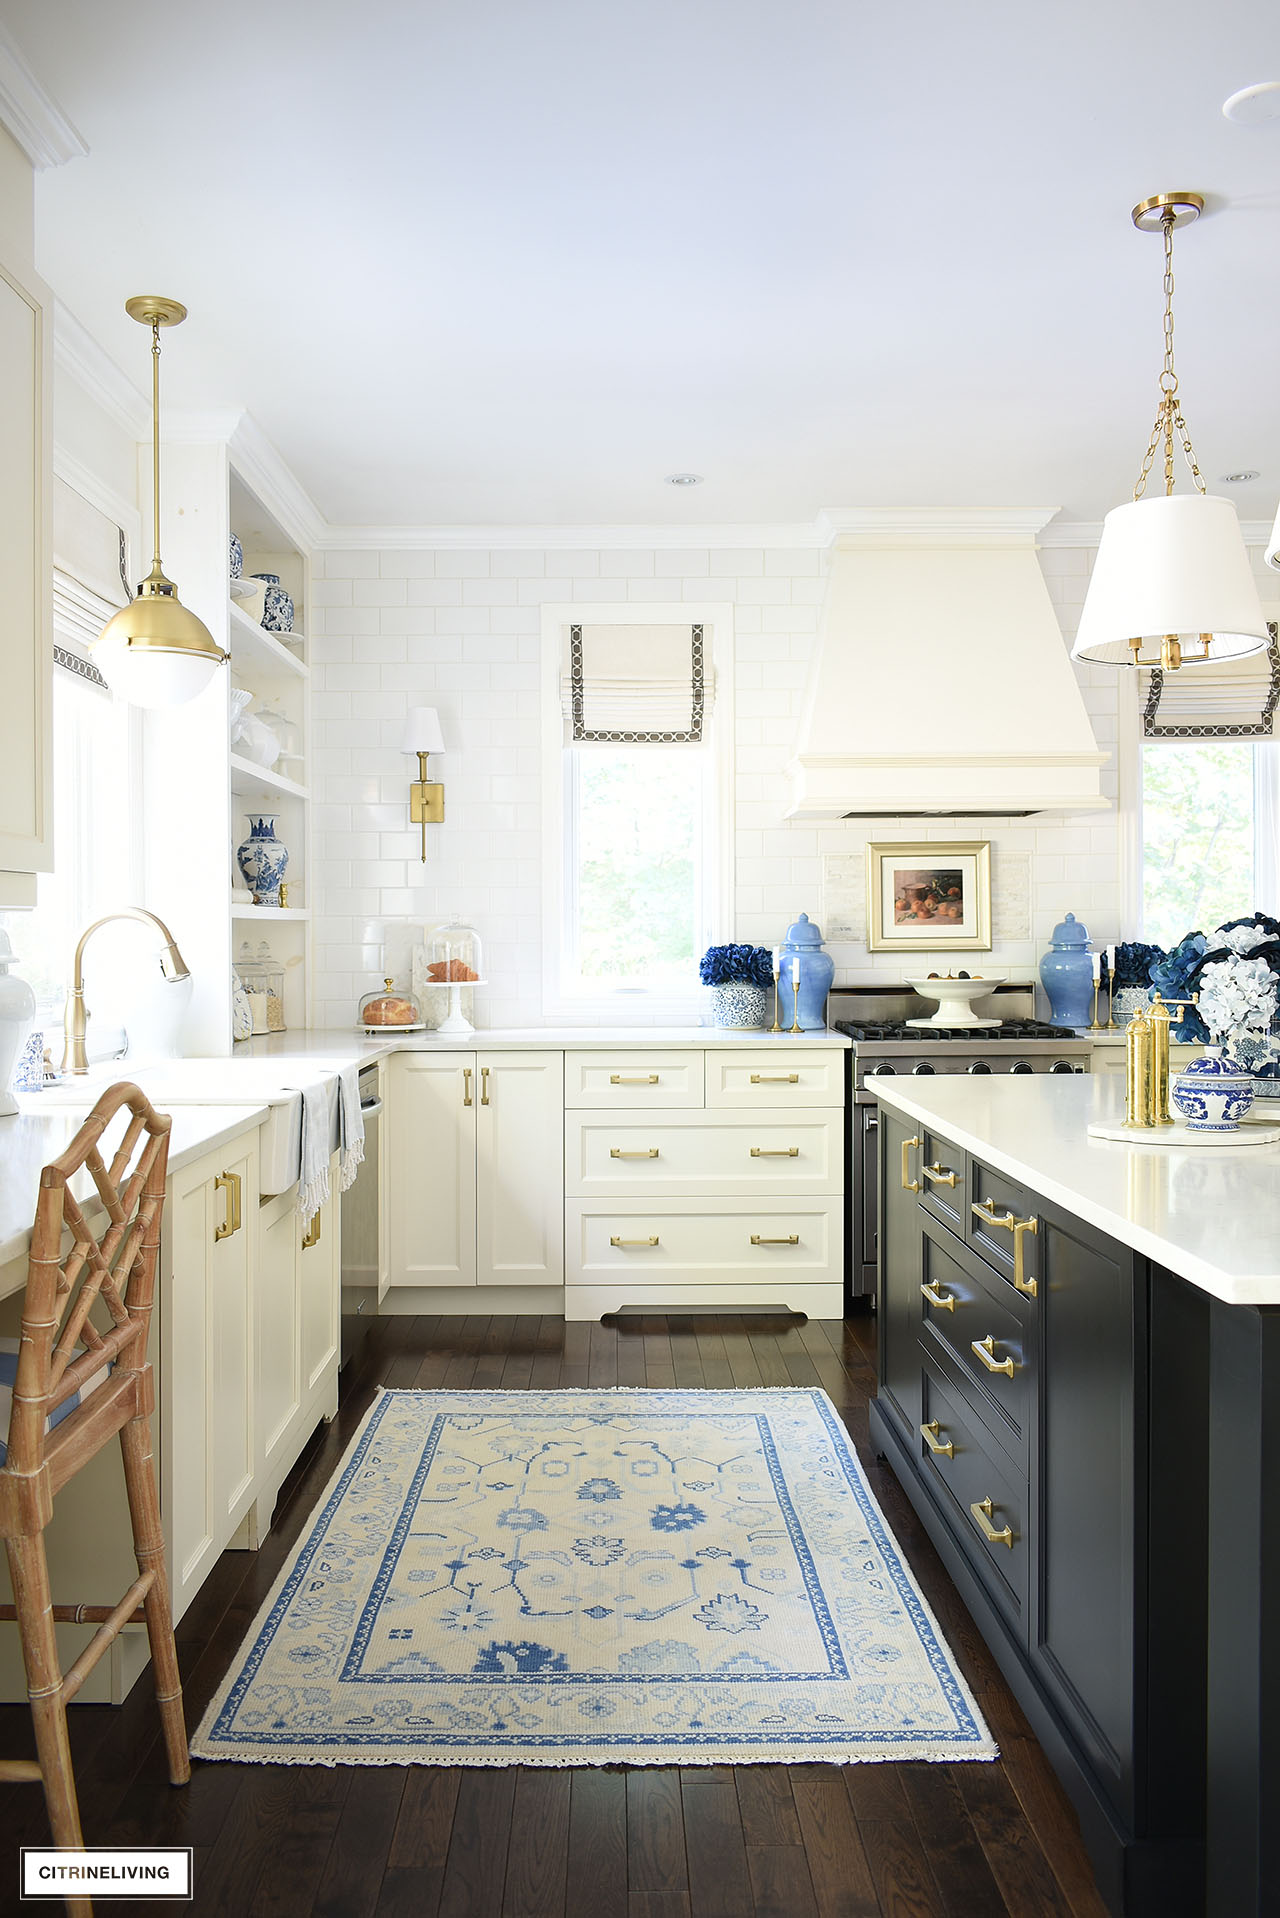 Kitchen decorated for fall with a blue and ivory oushak rug, blue floral arrangements, vintage art and gold accents.